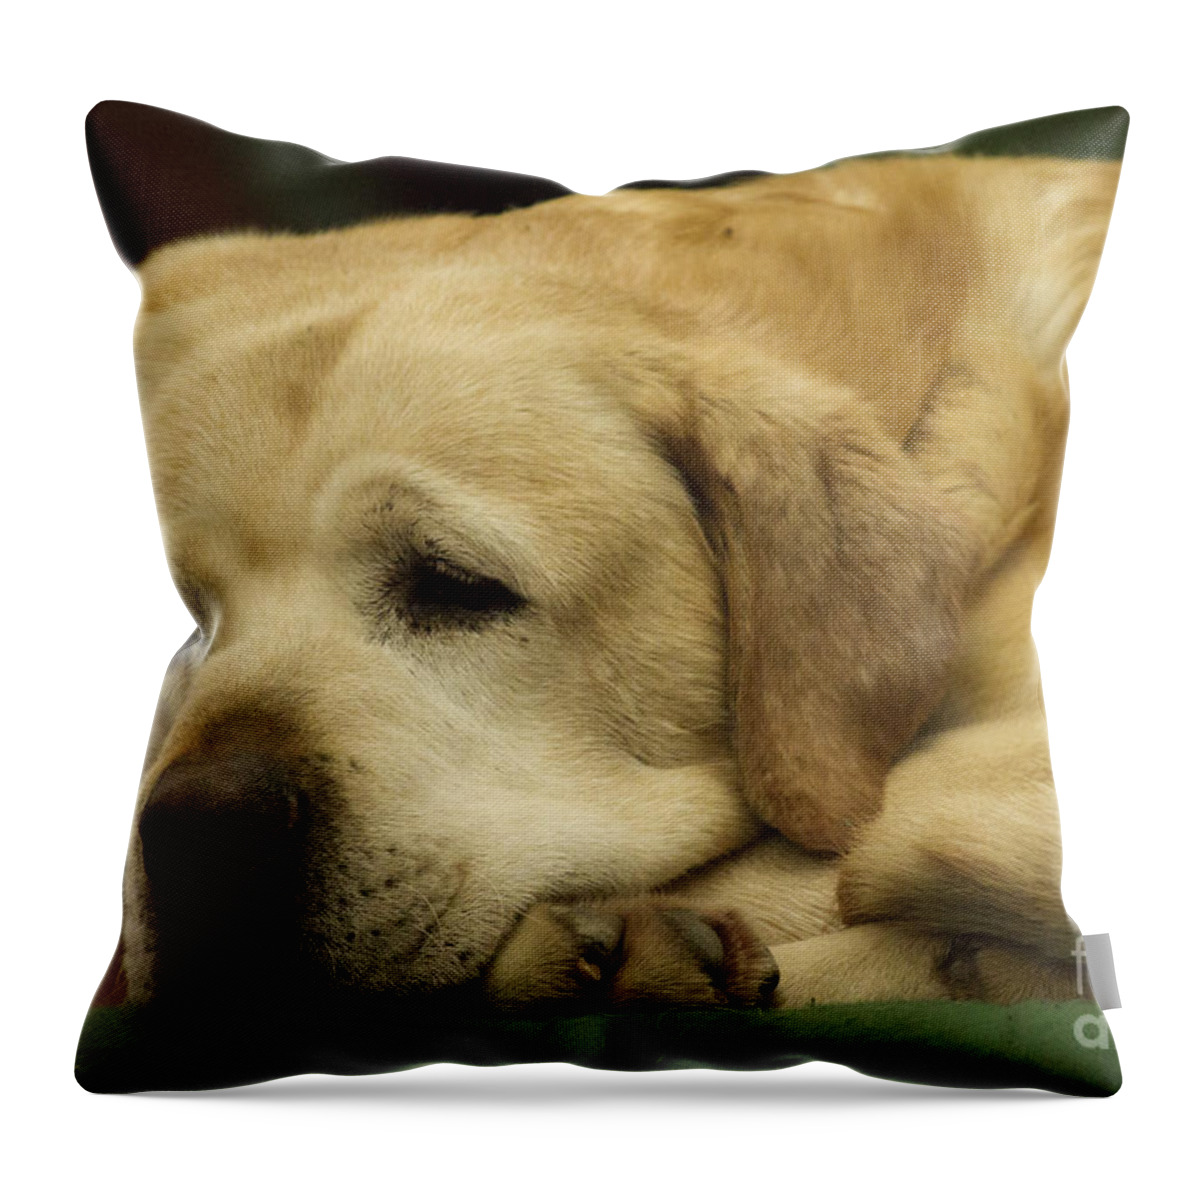 Nature Throw Pillow featuring the photograph Lazy Pet Series 3 by Heiko Koehrer-Wagner